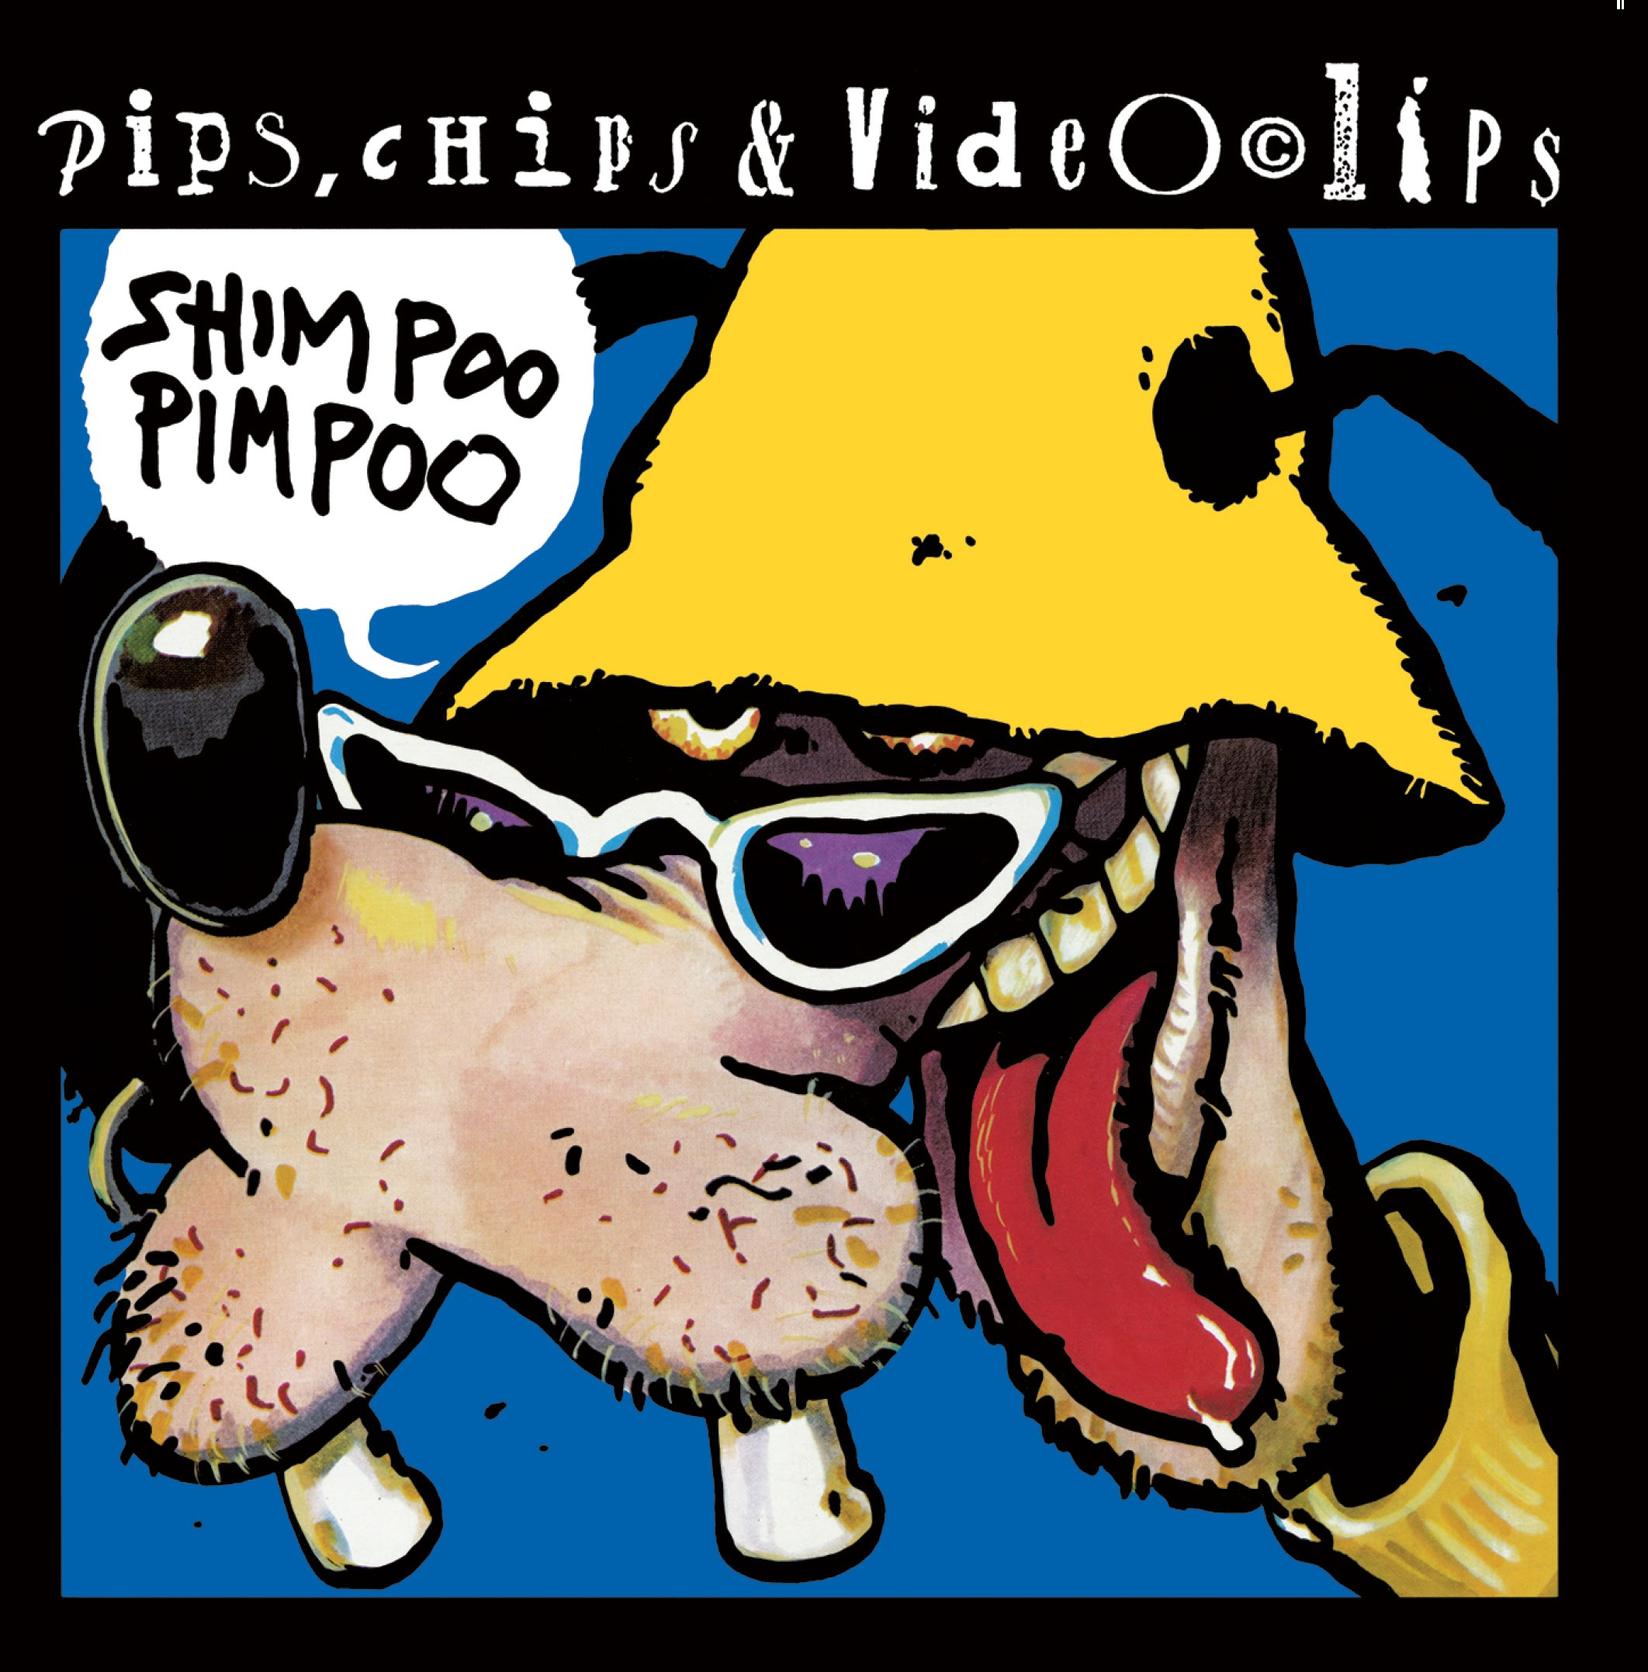 PIPS CHIPS VIDEO CLIPS- Shimpoo Pimpoo